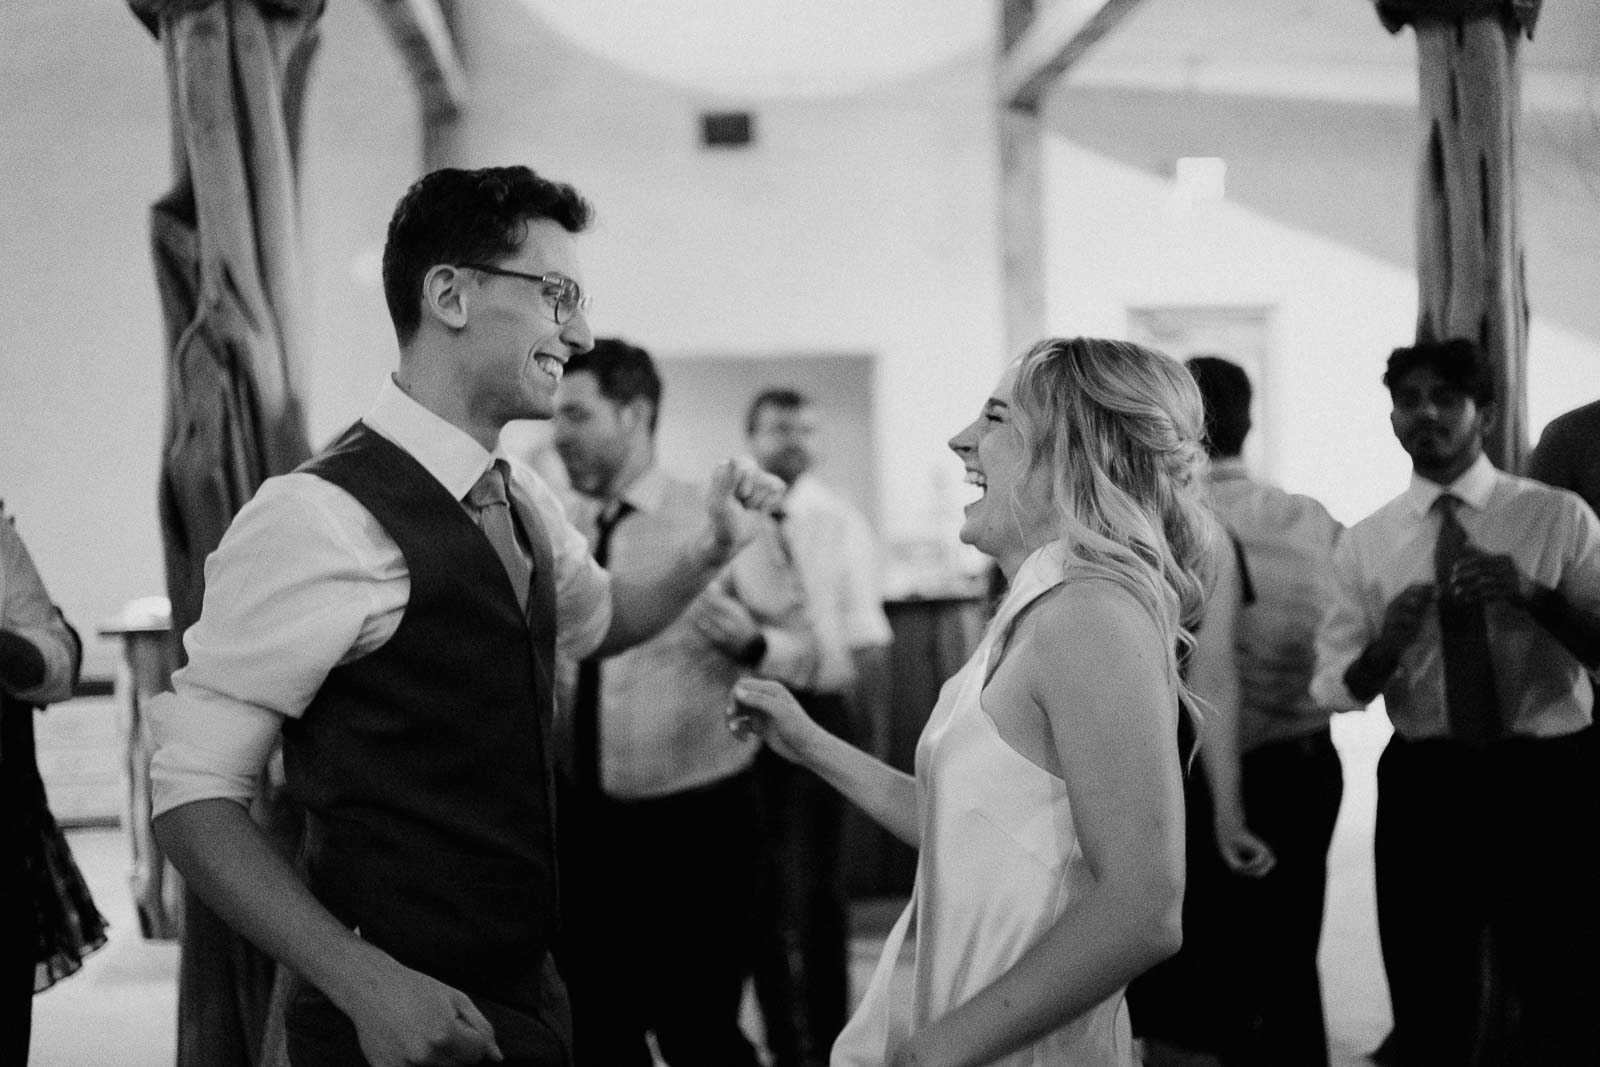 The wedded couple in a moment of pure bliss and joy on the dancefloor at Barr Mansion in Austin Texas